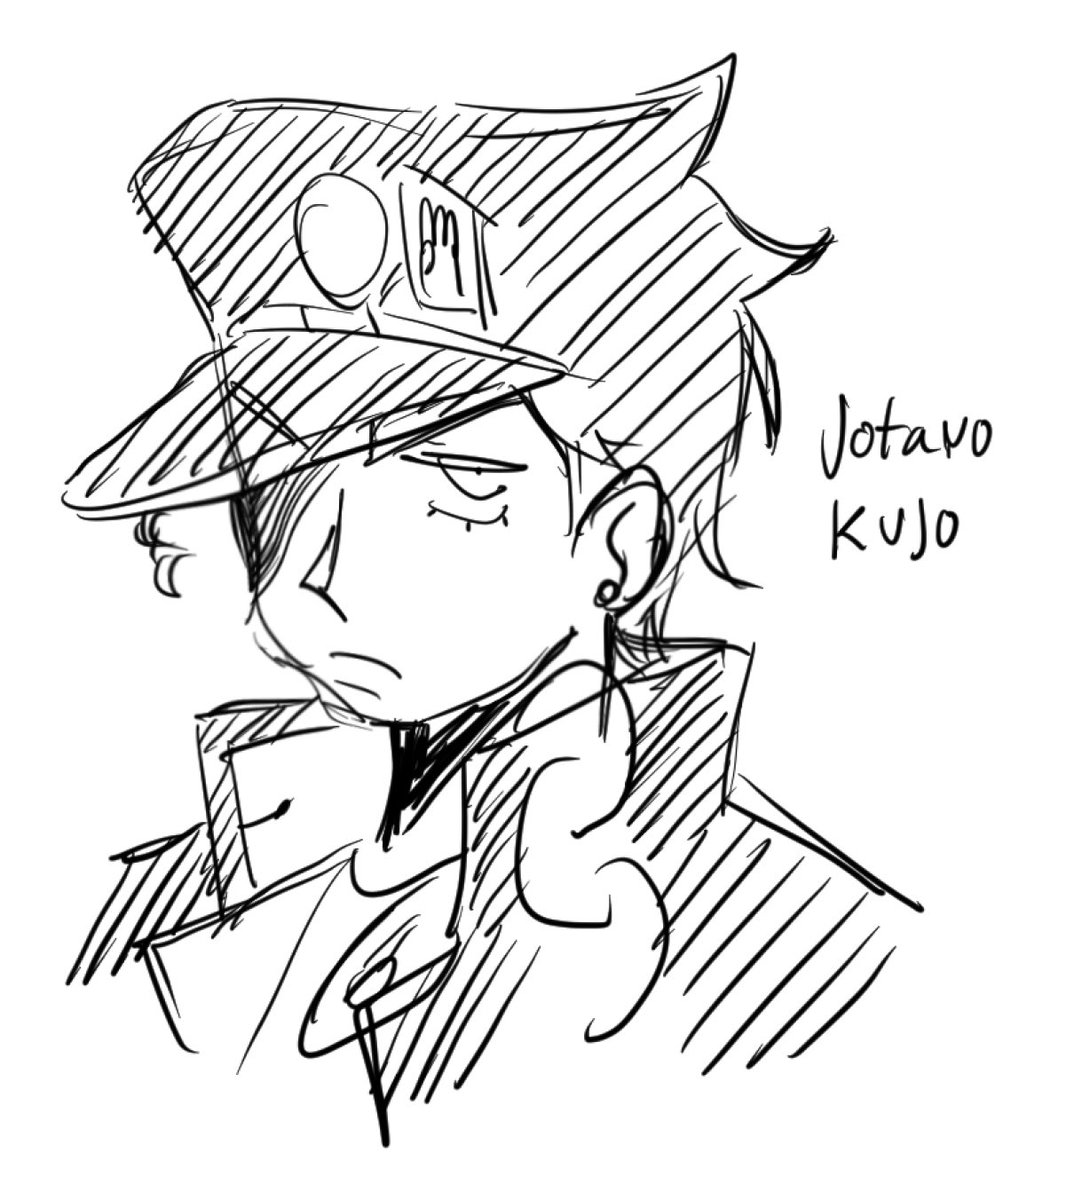 Scribbled jotaro earlier today bc i wanted to impress a small child with my #epic drawing skills